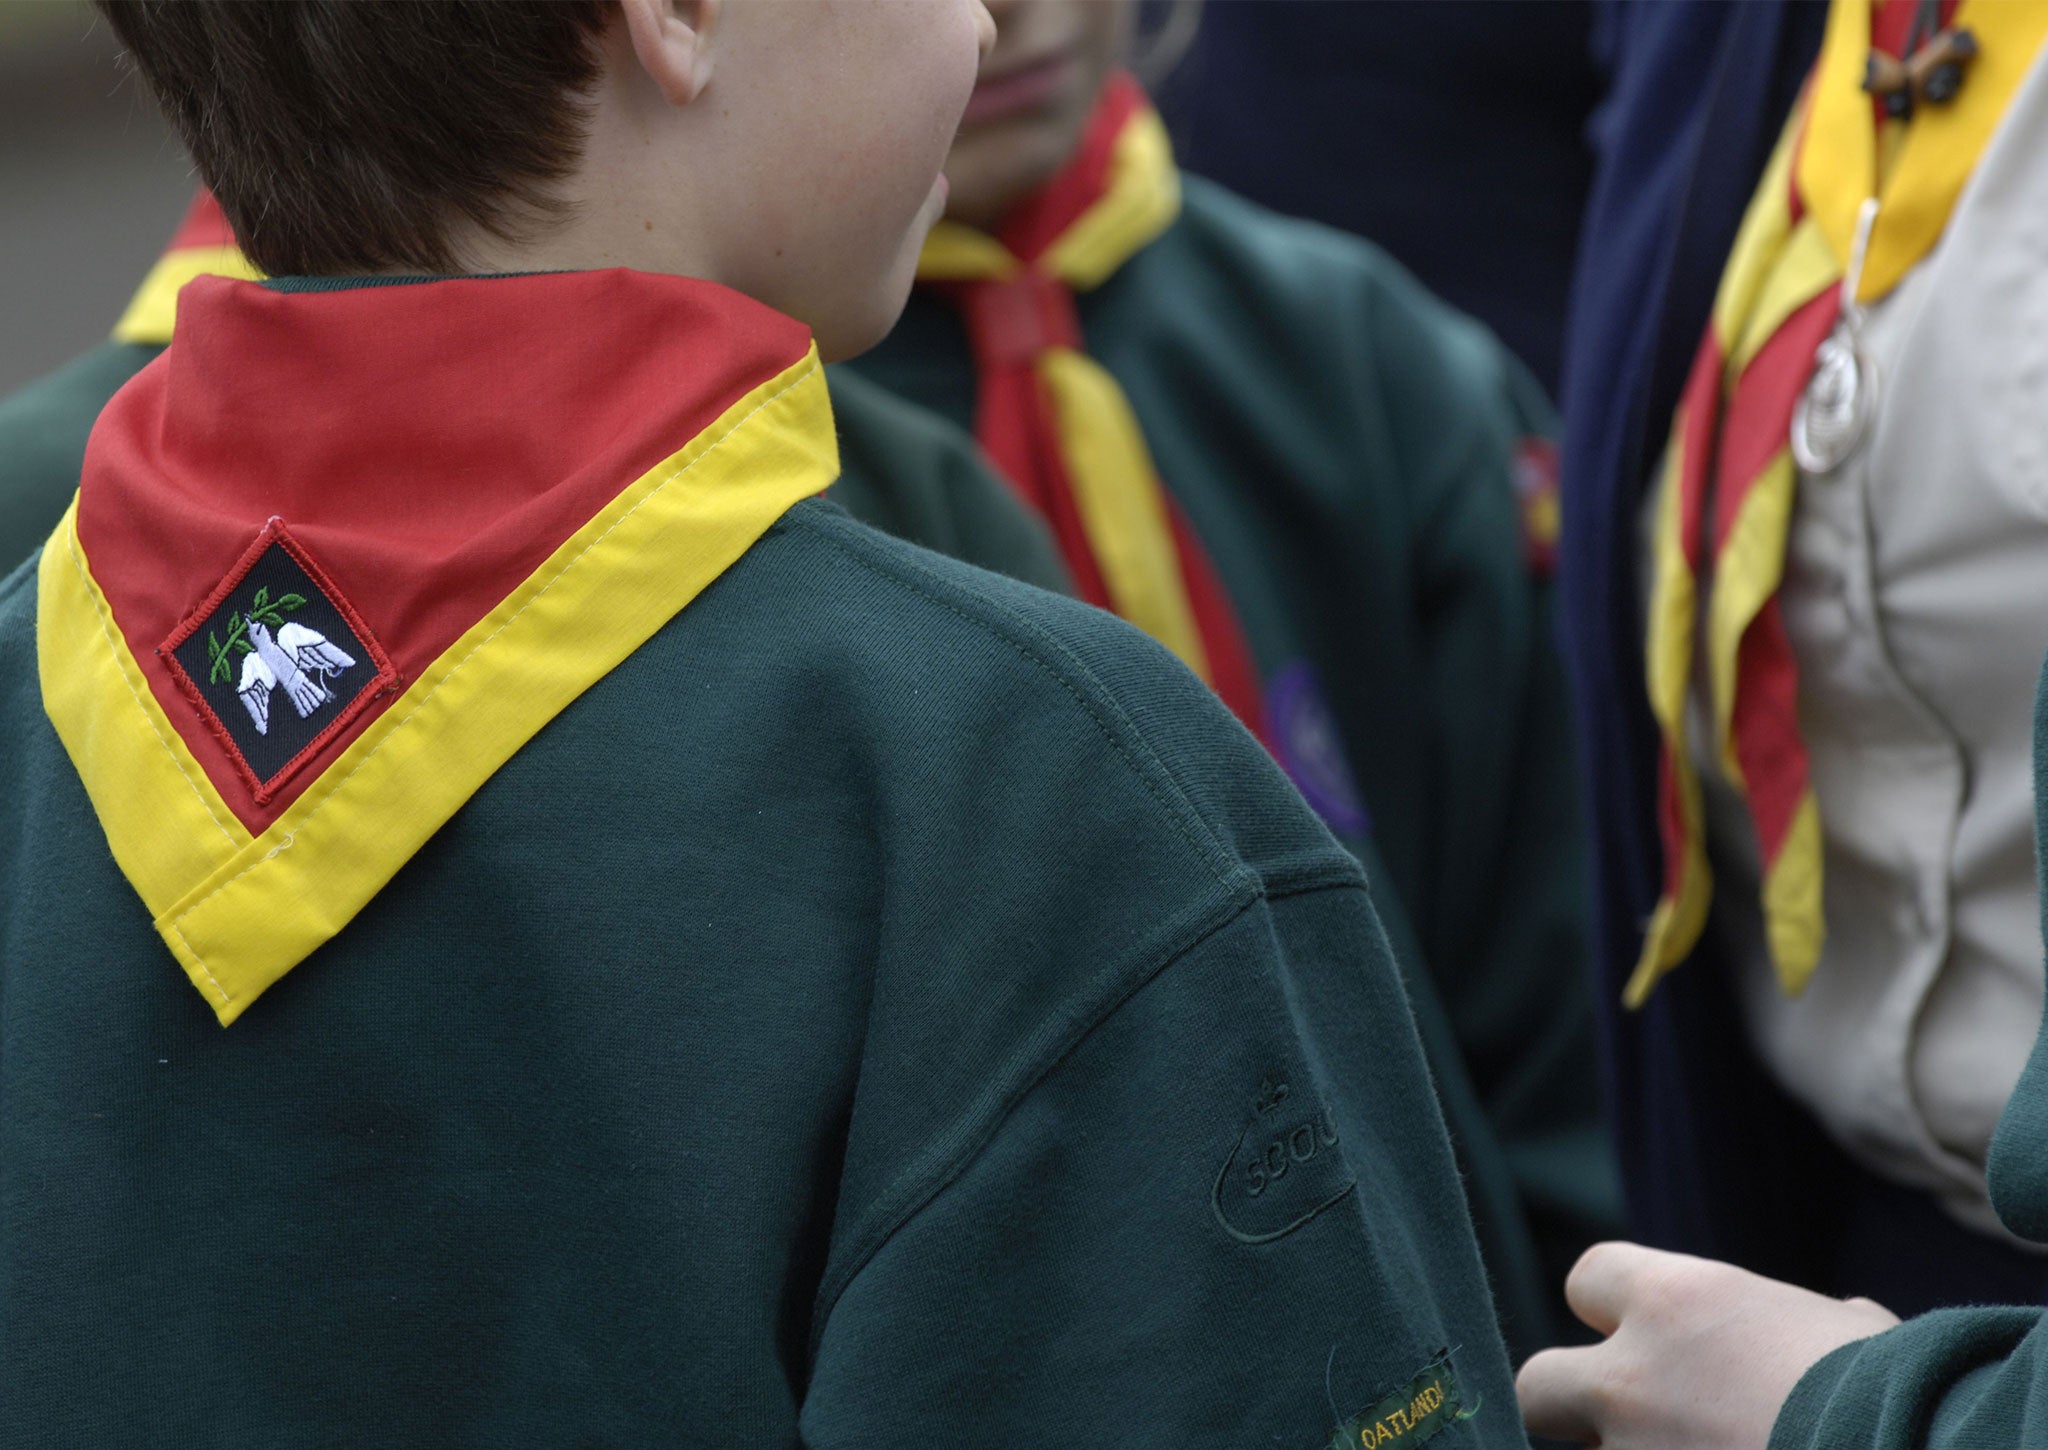 Cubs, scouts and air scouts take part in St Georges Day memorial service